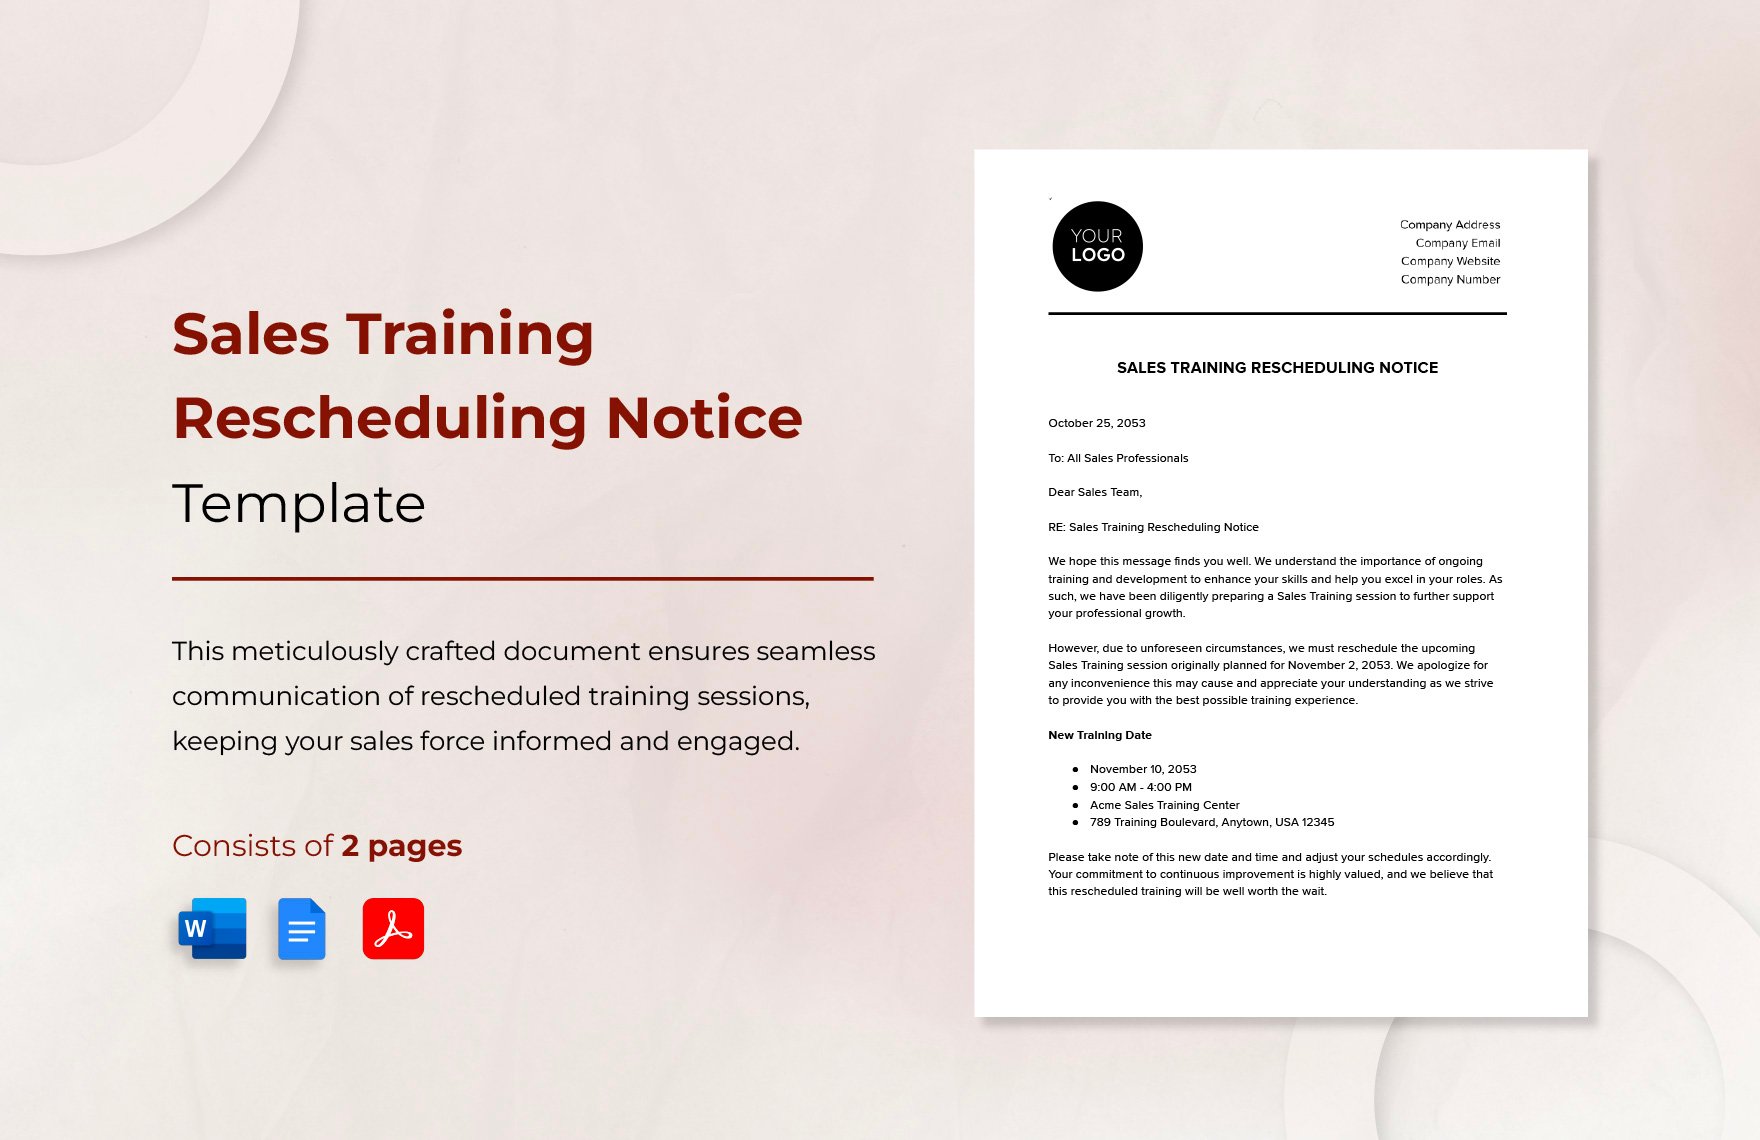 Sales Training Rescheduling Notice Template in Word, Google Docs, PDF